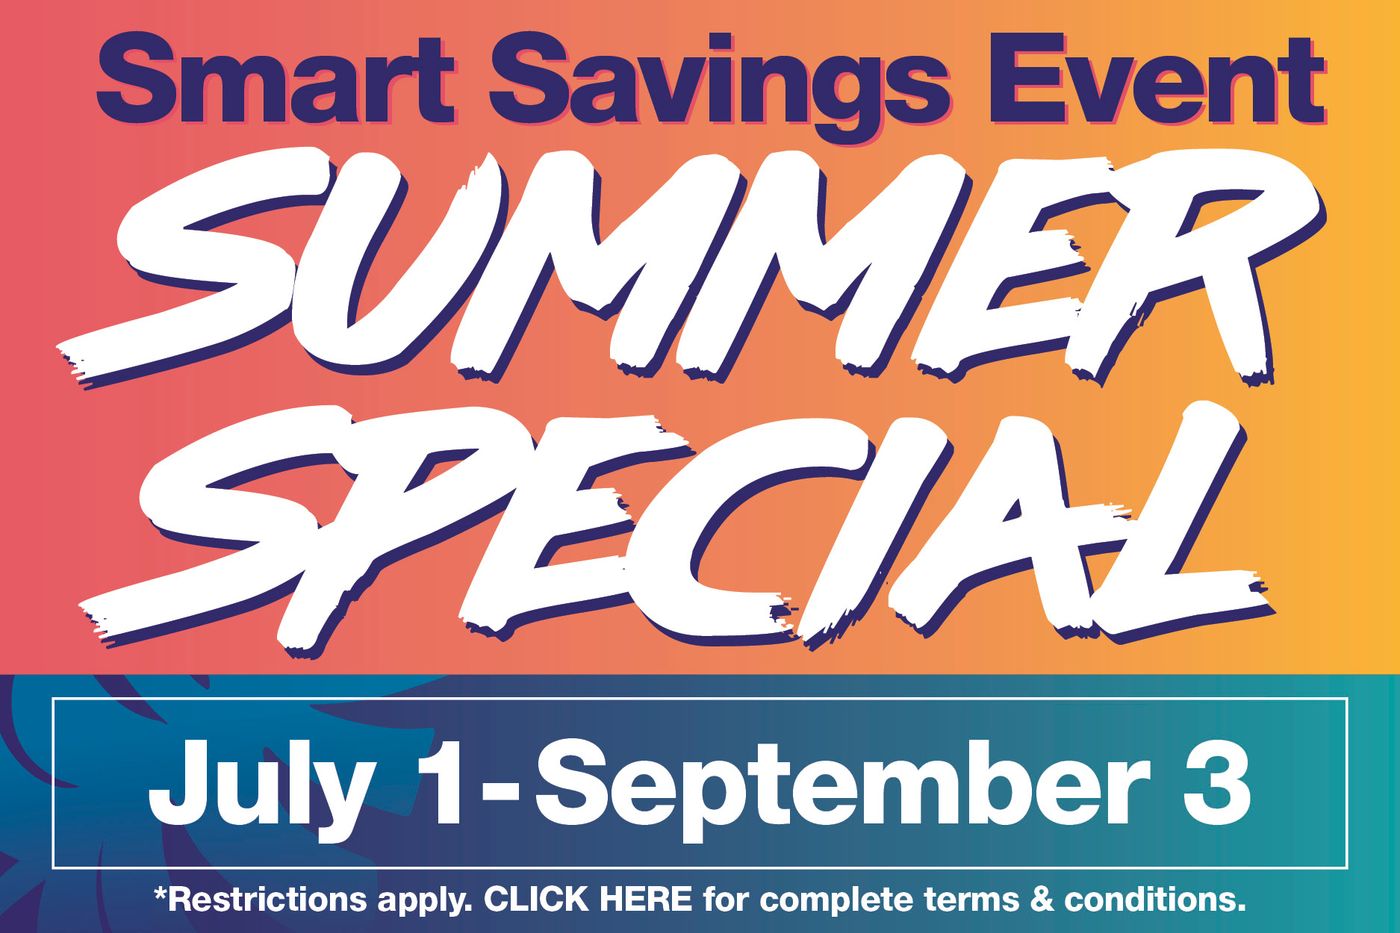 End-of-summer savings event